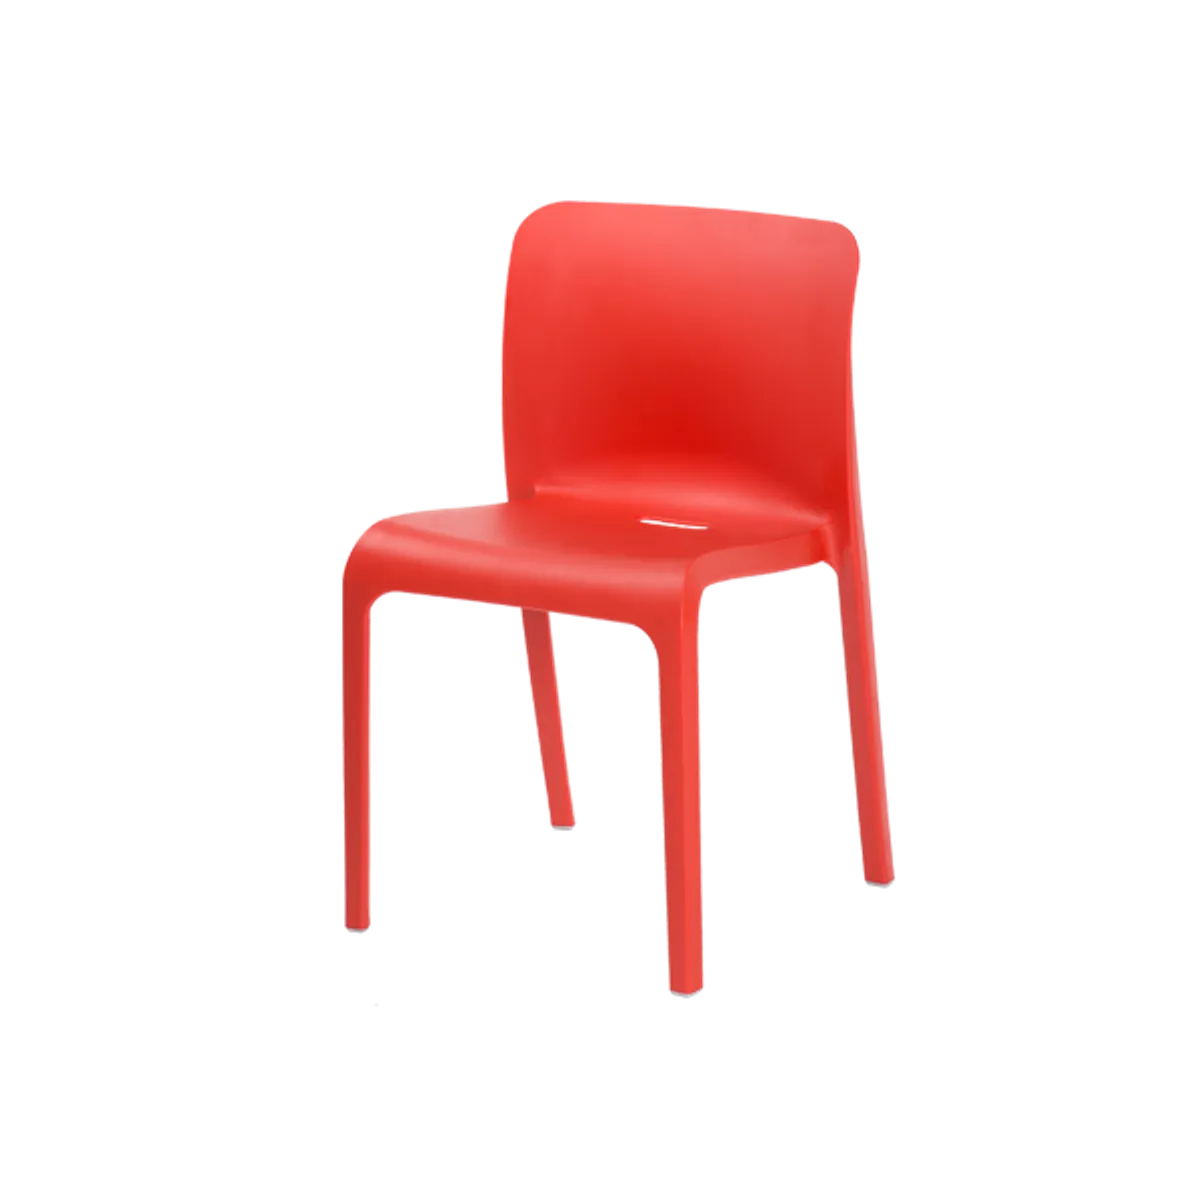 Pollysidechair Inside Out Contracts copy